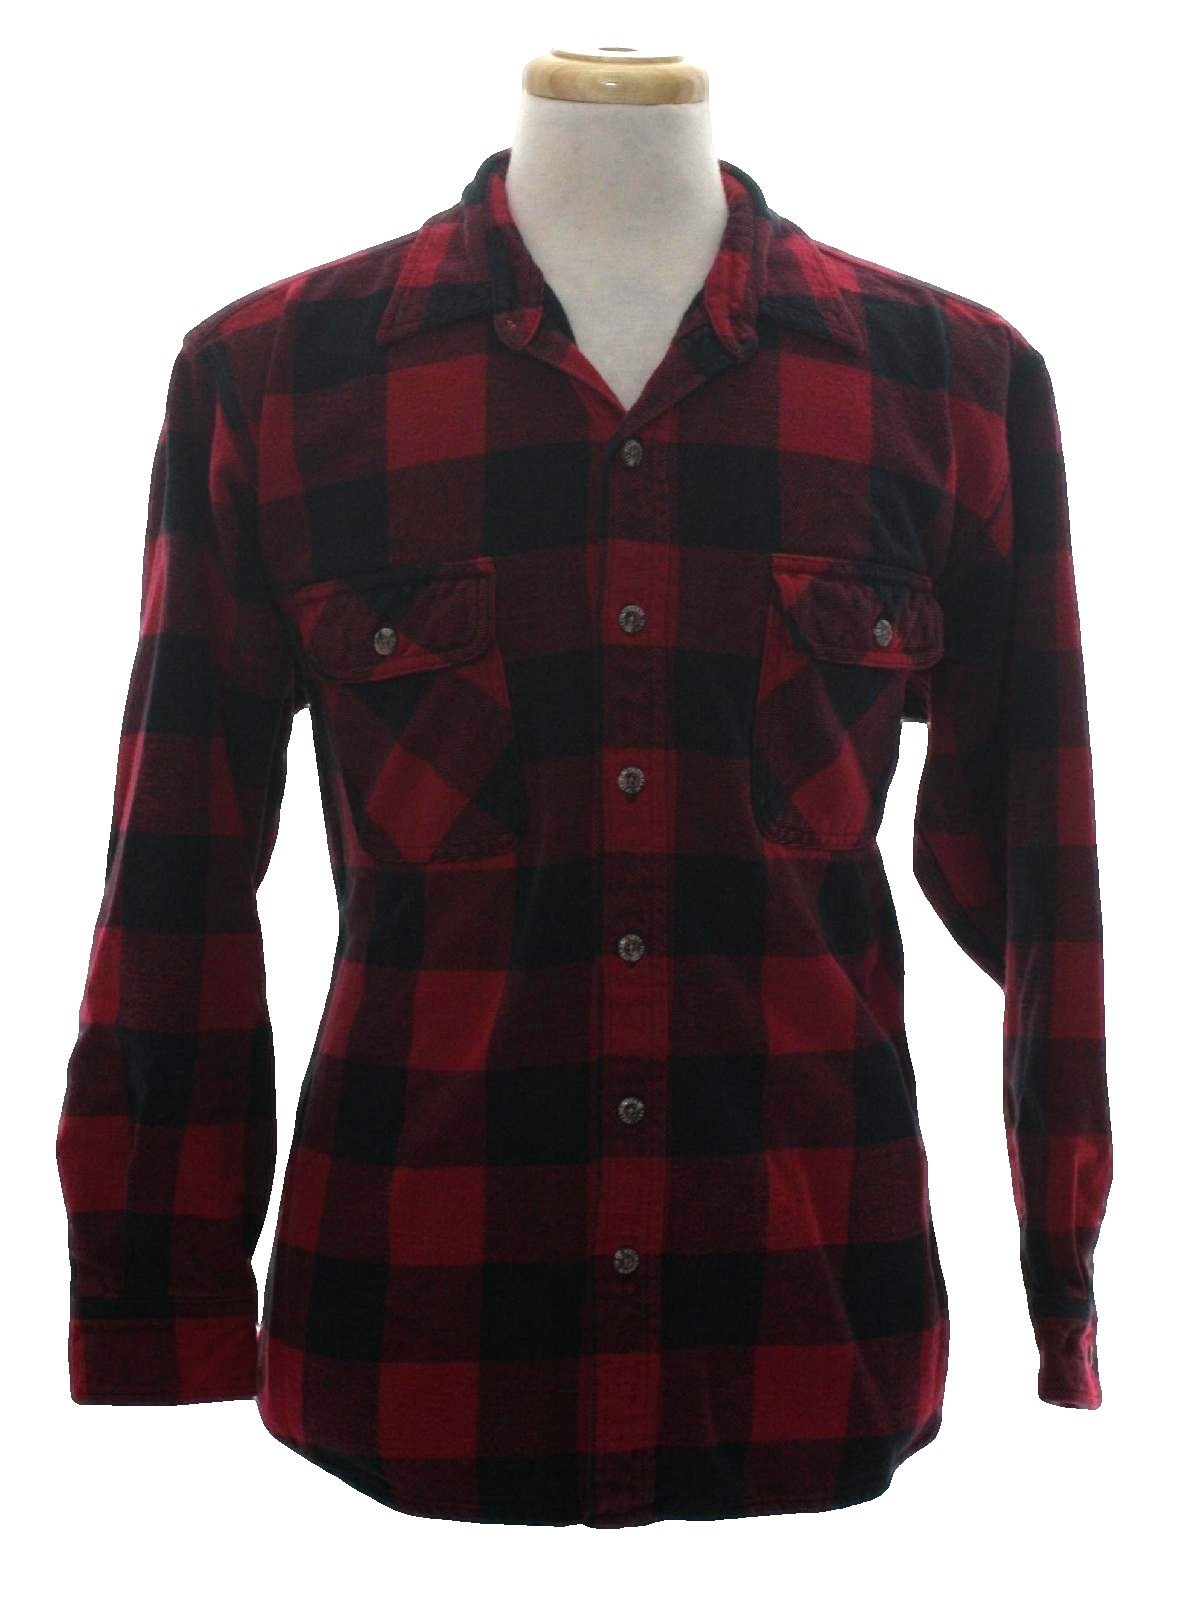 Retro 1990's Shirt (Field and Stream) : 90s -Field and Stream- Mens red ...